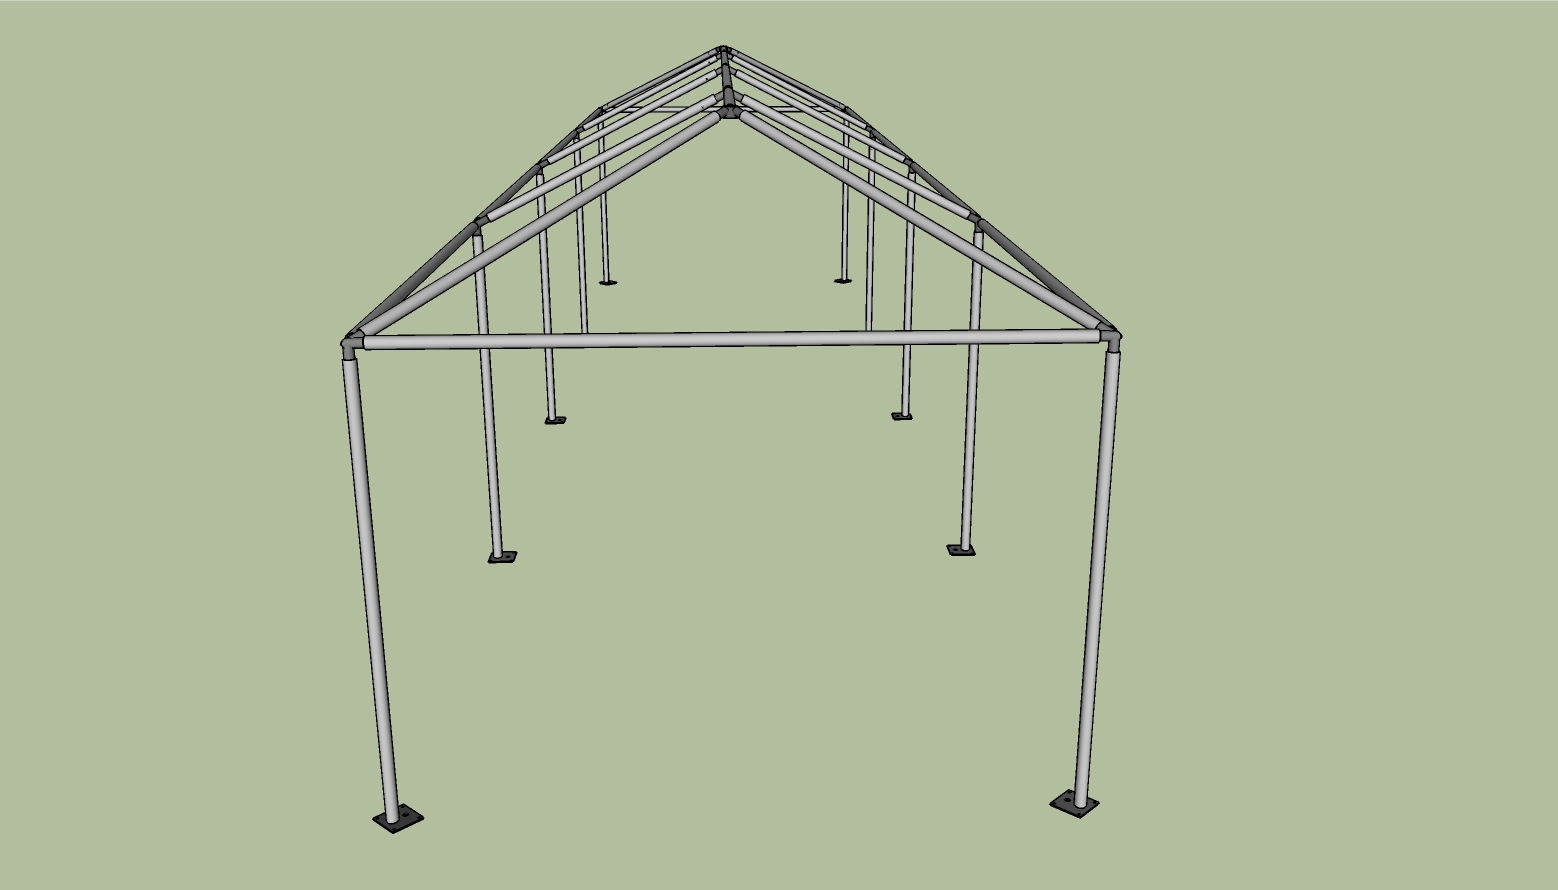 10x40 frame tent side view